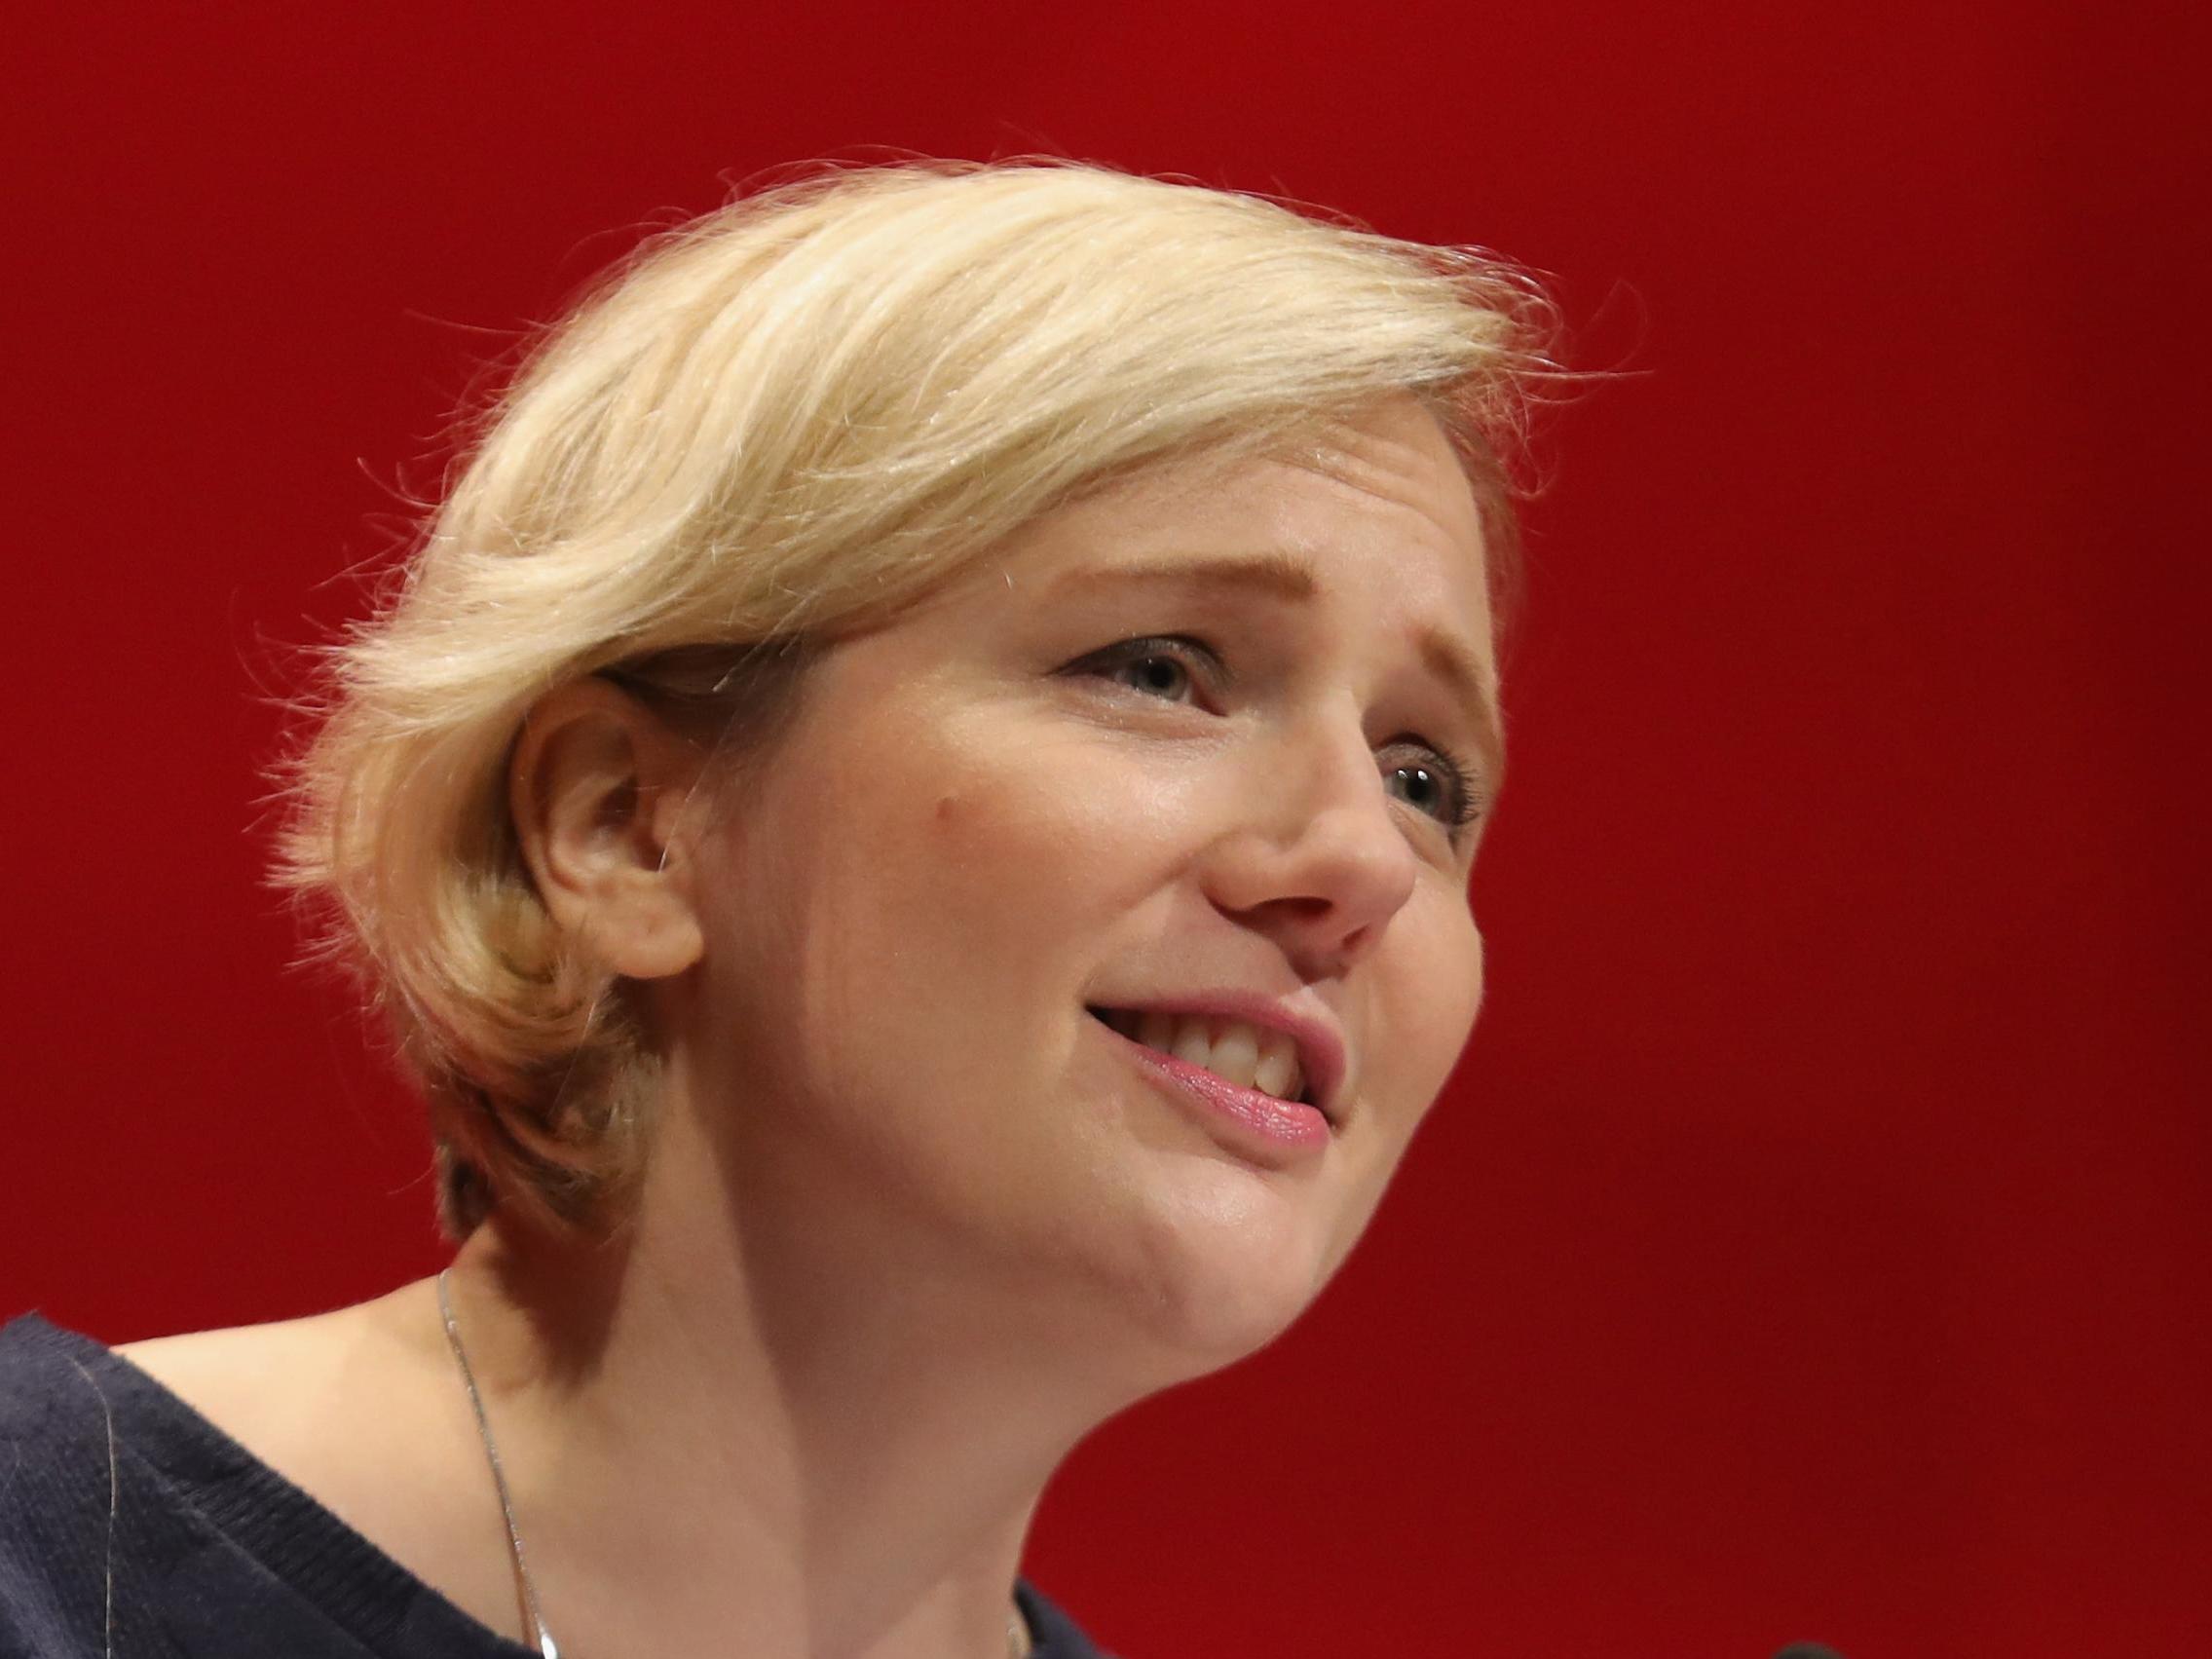 Stella Creasy revealed she was expecting a child in the column